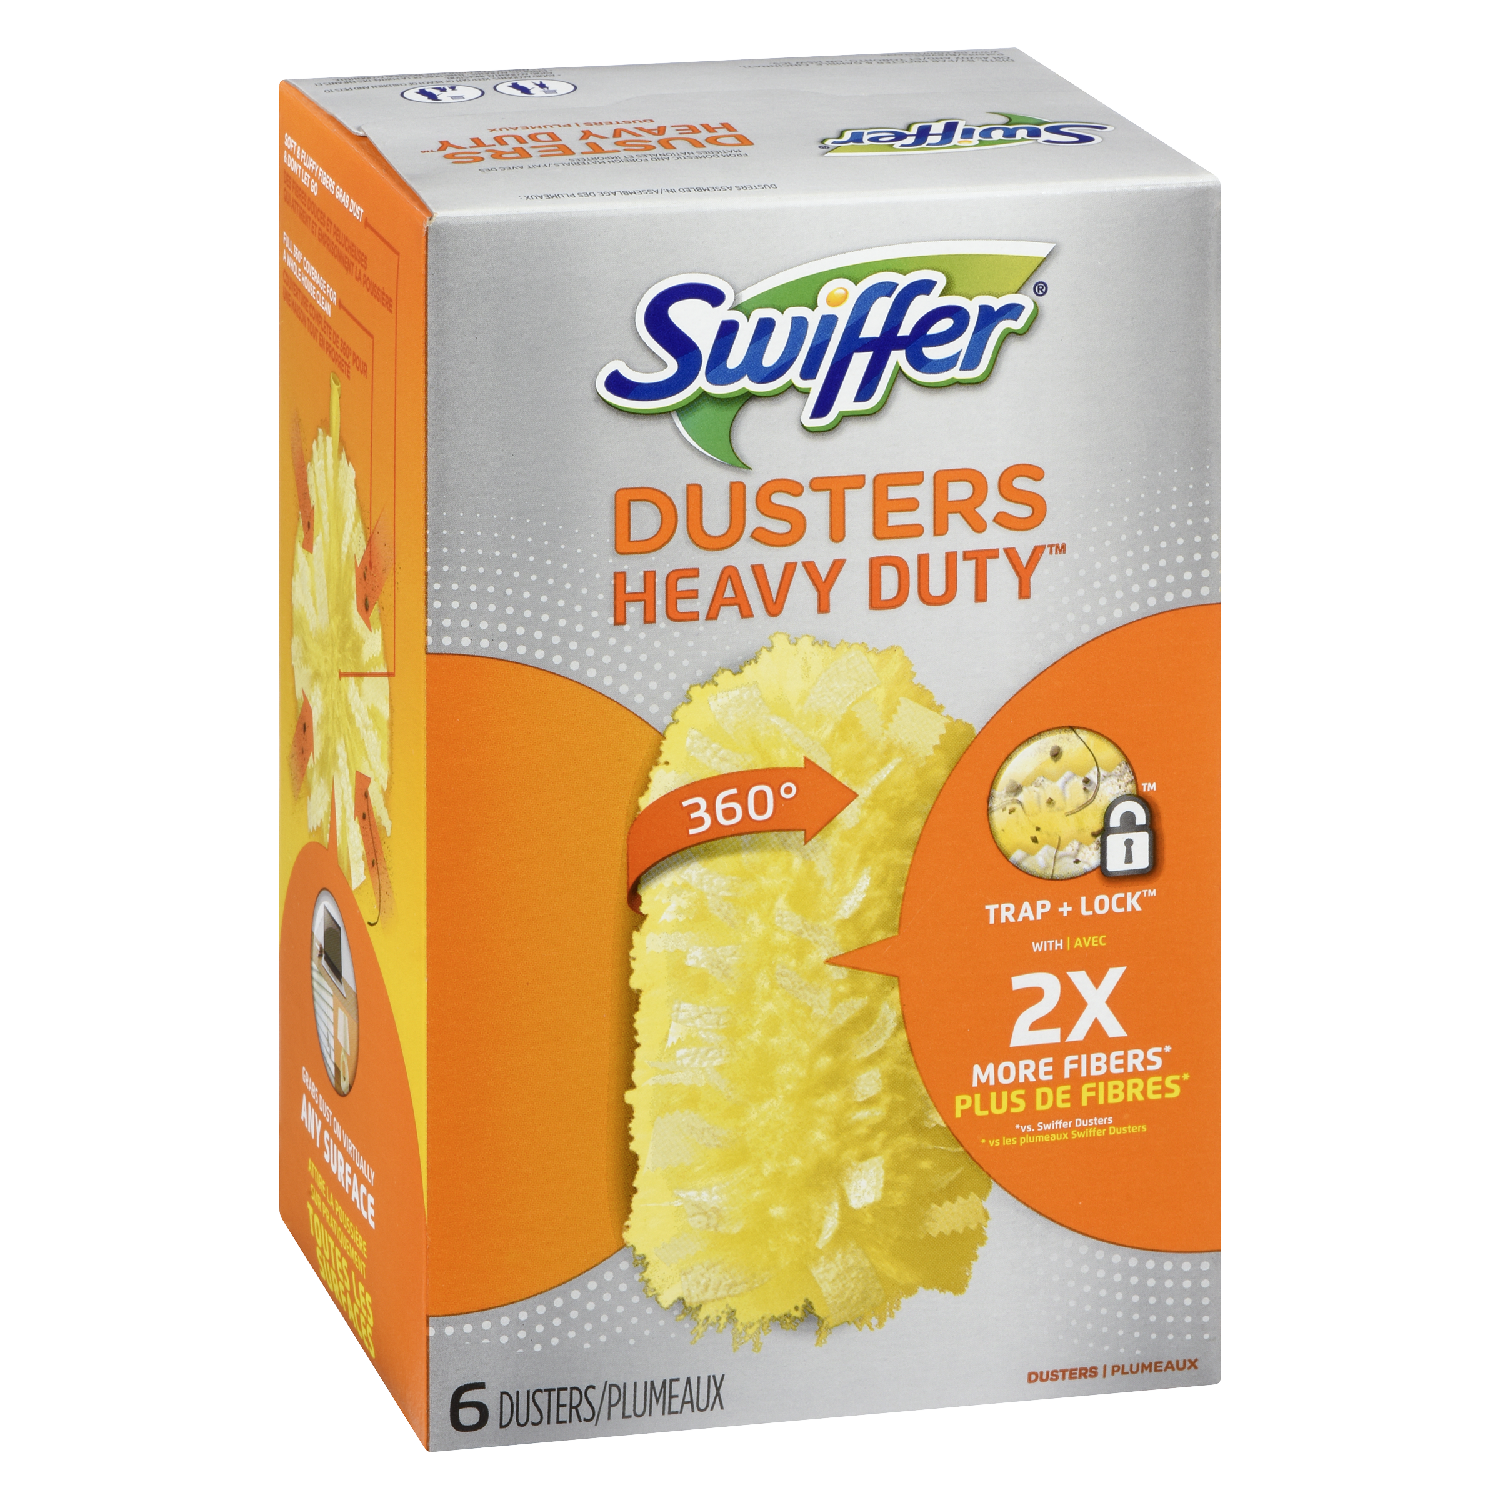 360 Duster Refill x6 - Broom and mop